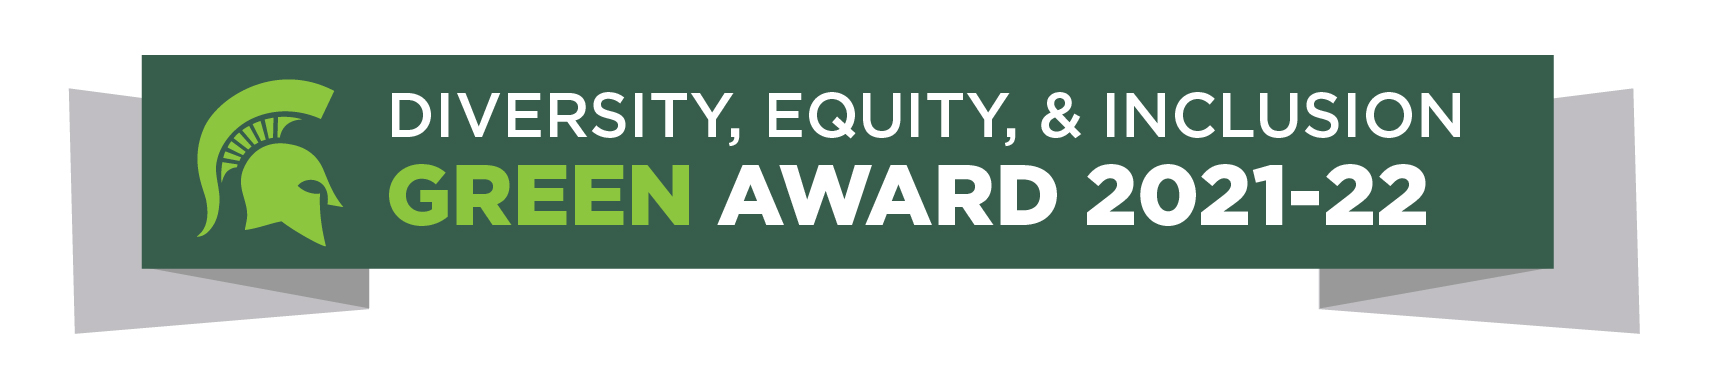 MSU CANR Diversity, Equity and Inclusion Green Award 2021-2022